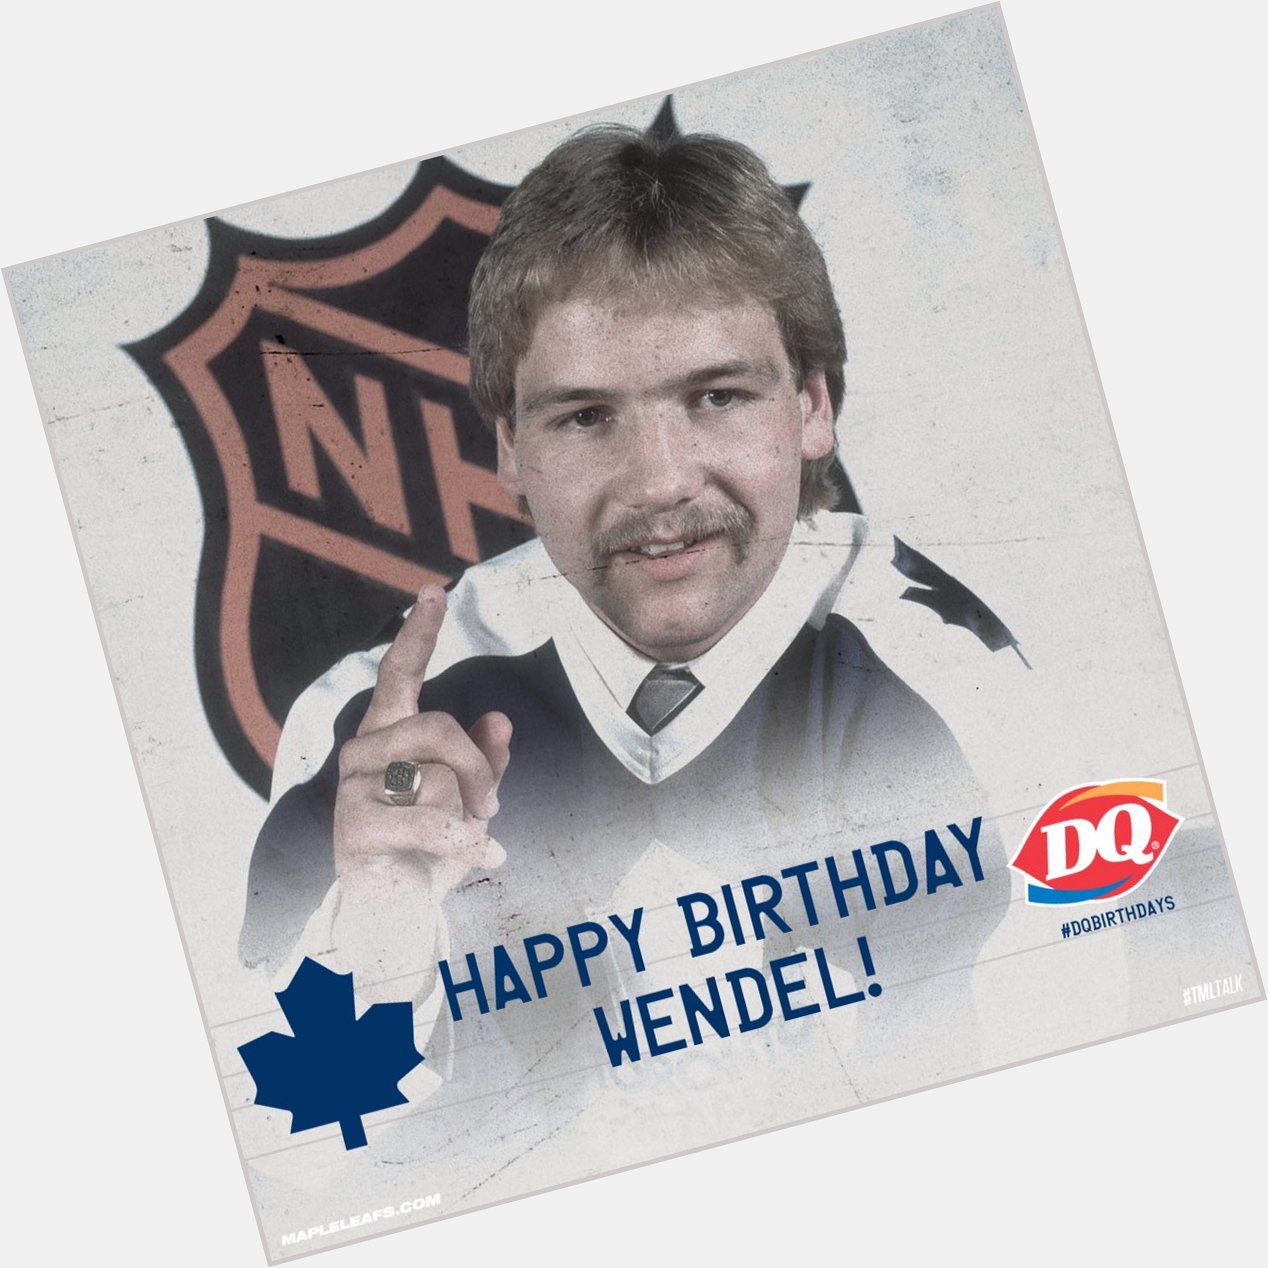 Happy Birthday to Leafs great, Wendel Clark!  